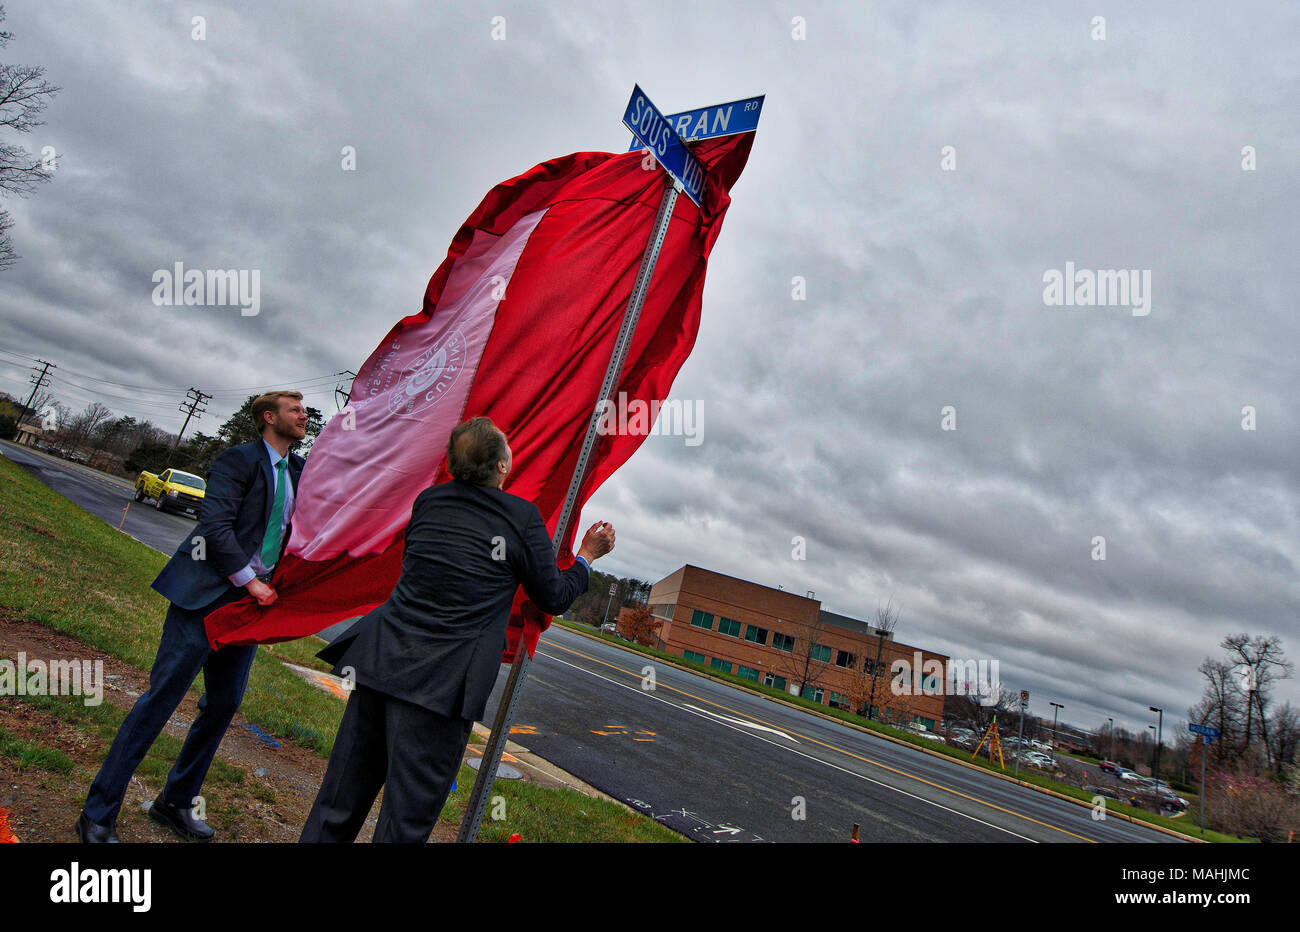 UNITED STATES: April 2, 2018: Broad Run Supervisor, Ron Meyers and Stanislas Vilgrain, Chairman and CEO of Cuisine Solution’s pulls the cover off of a Stock Photo